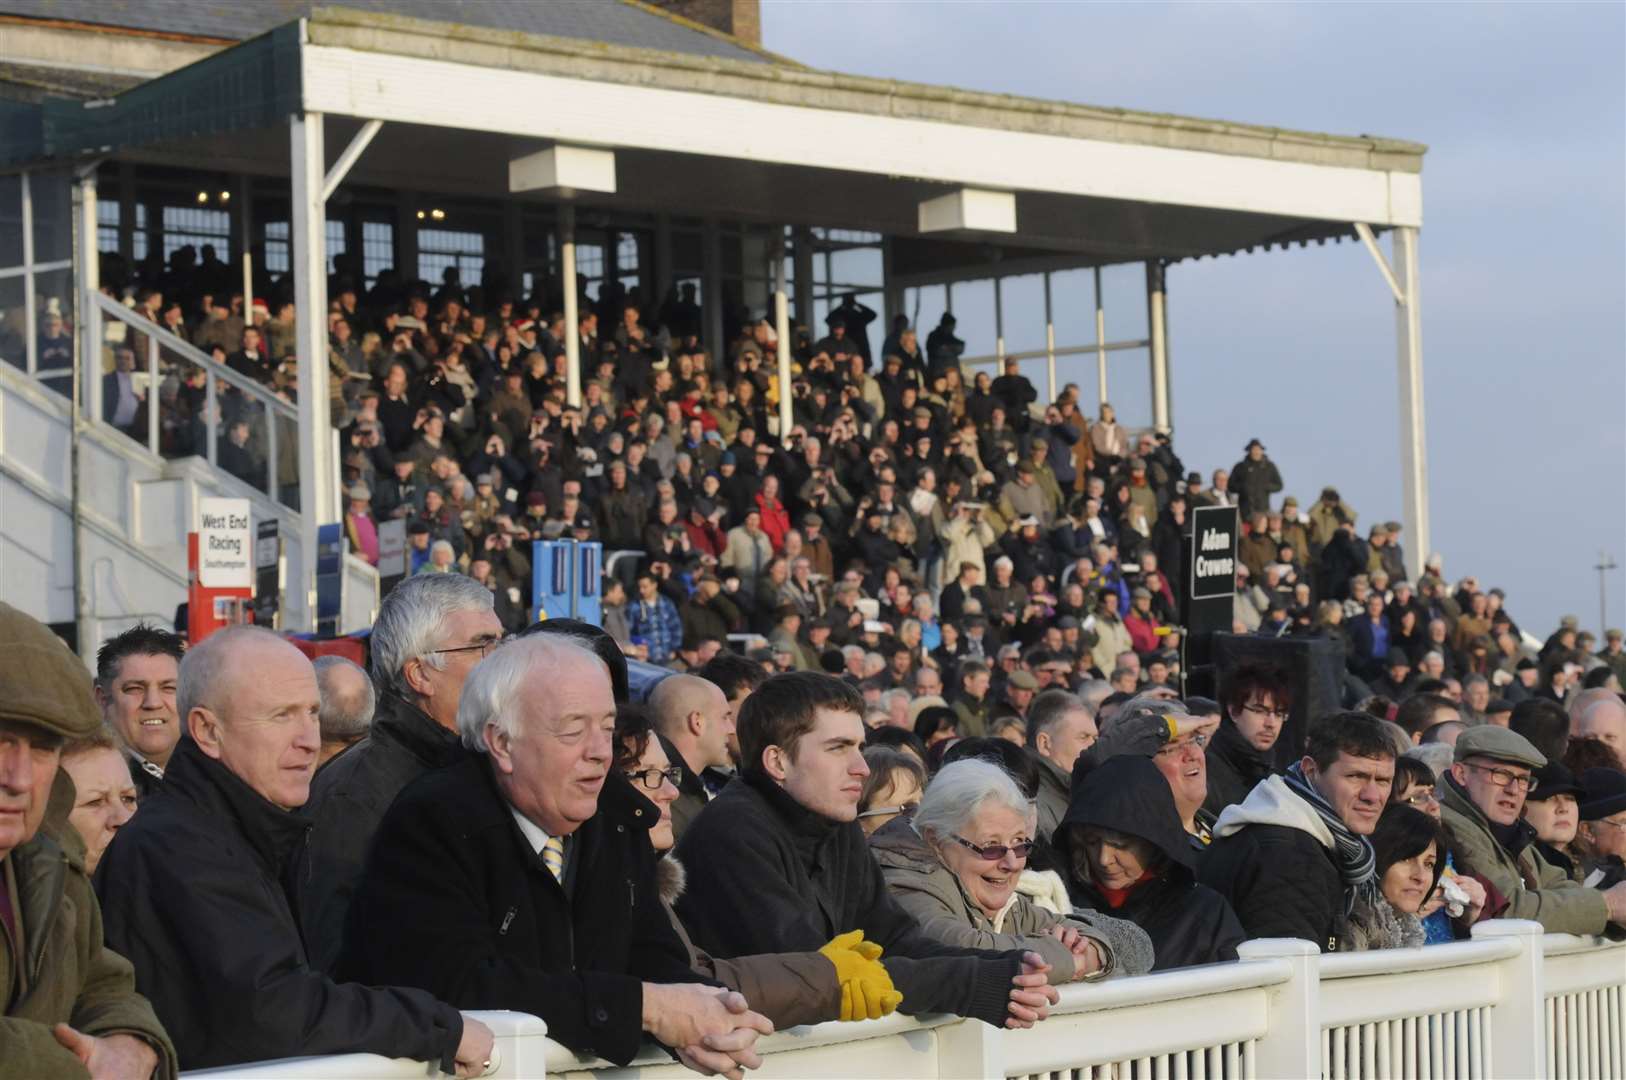 The sun came out for the large crowd during the track's final event in December 2012